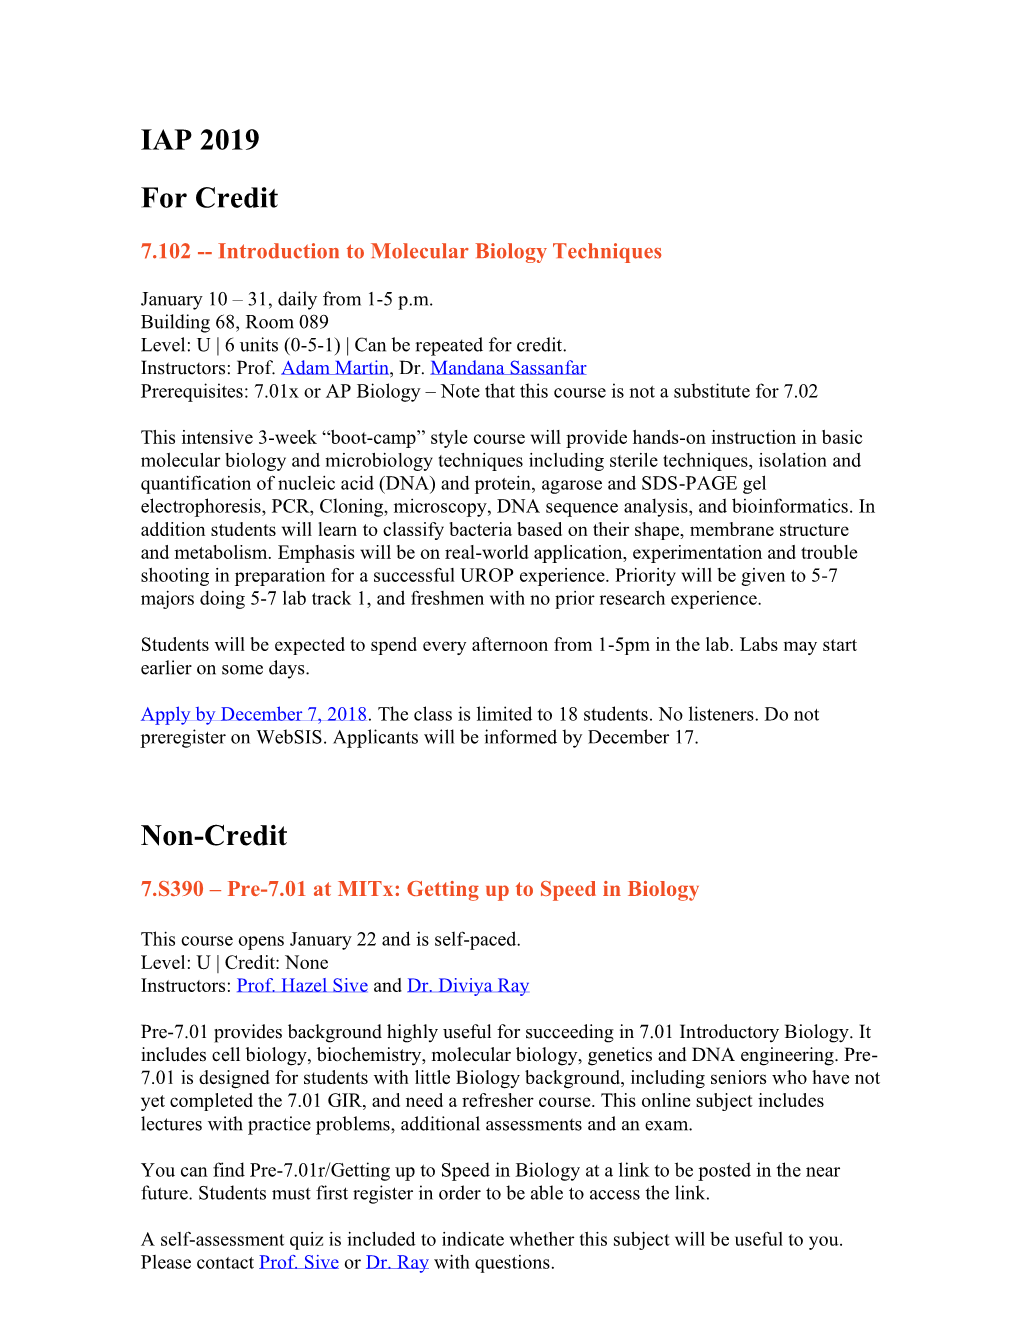 IAP 2019 for Credit Non-Credit